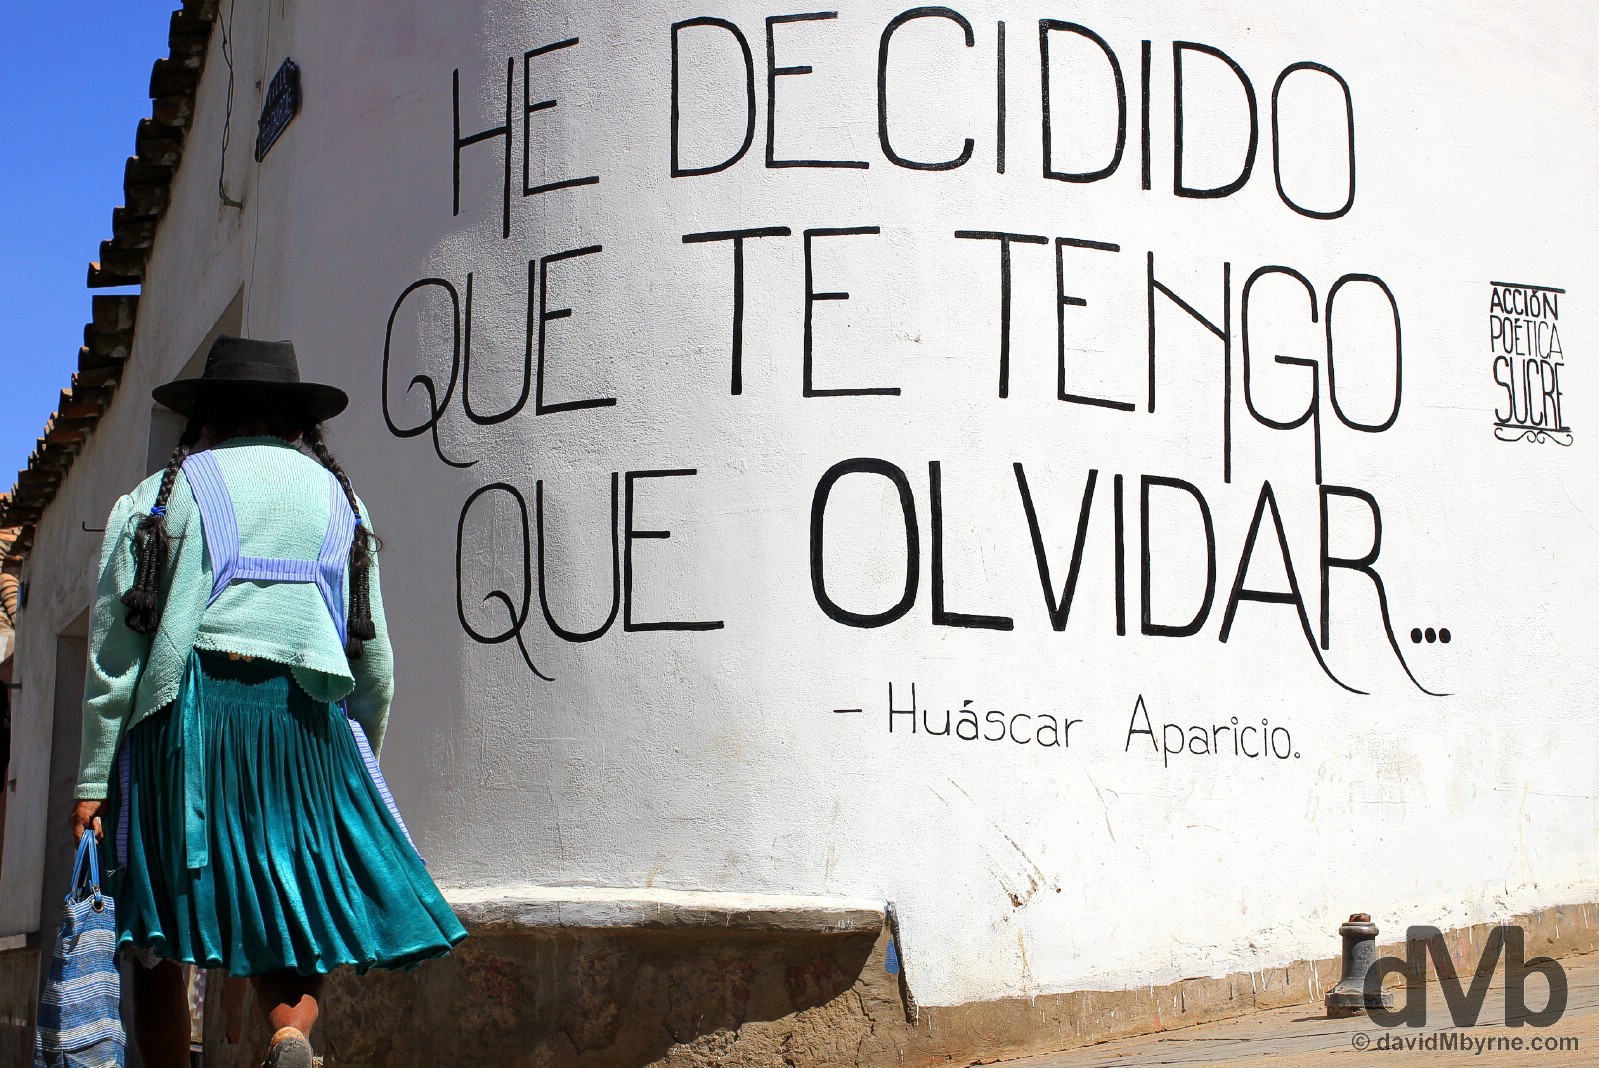 'I have decided that I have to forget'. A quote by Bolivian folk singer and Sucre native Huascar Aparicio, who died in a car crash in 2013 at the age of 41, on the streets of Sucre, Bolivia. August 30, 2015.